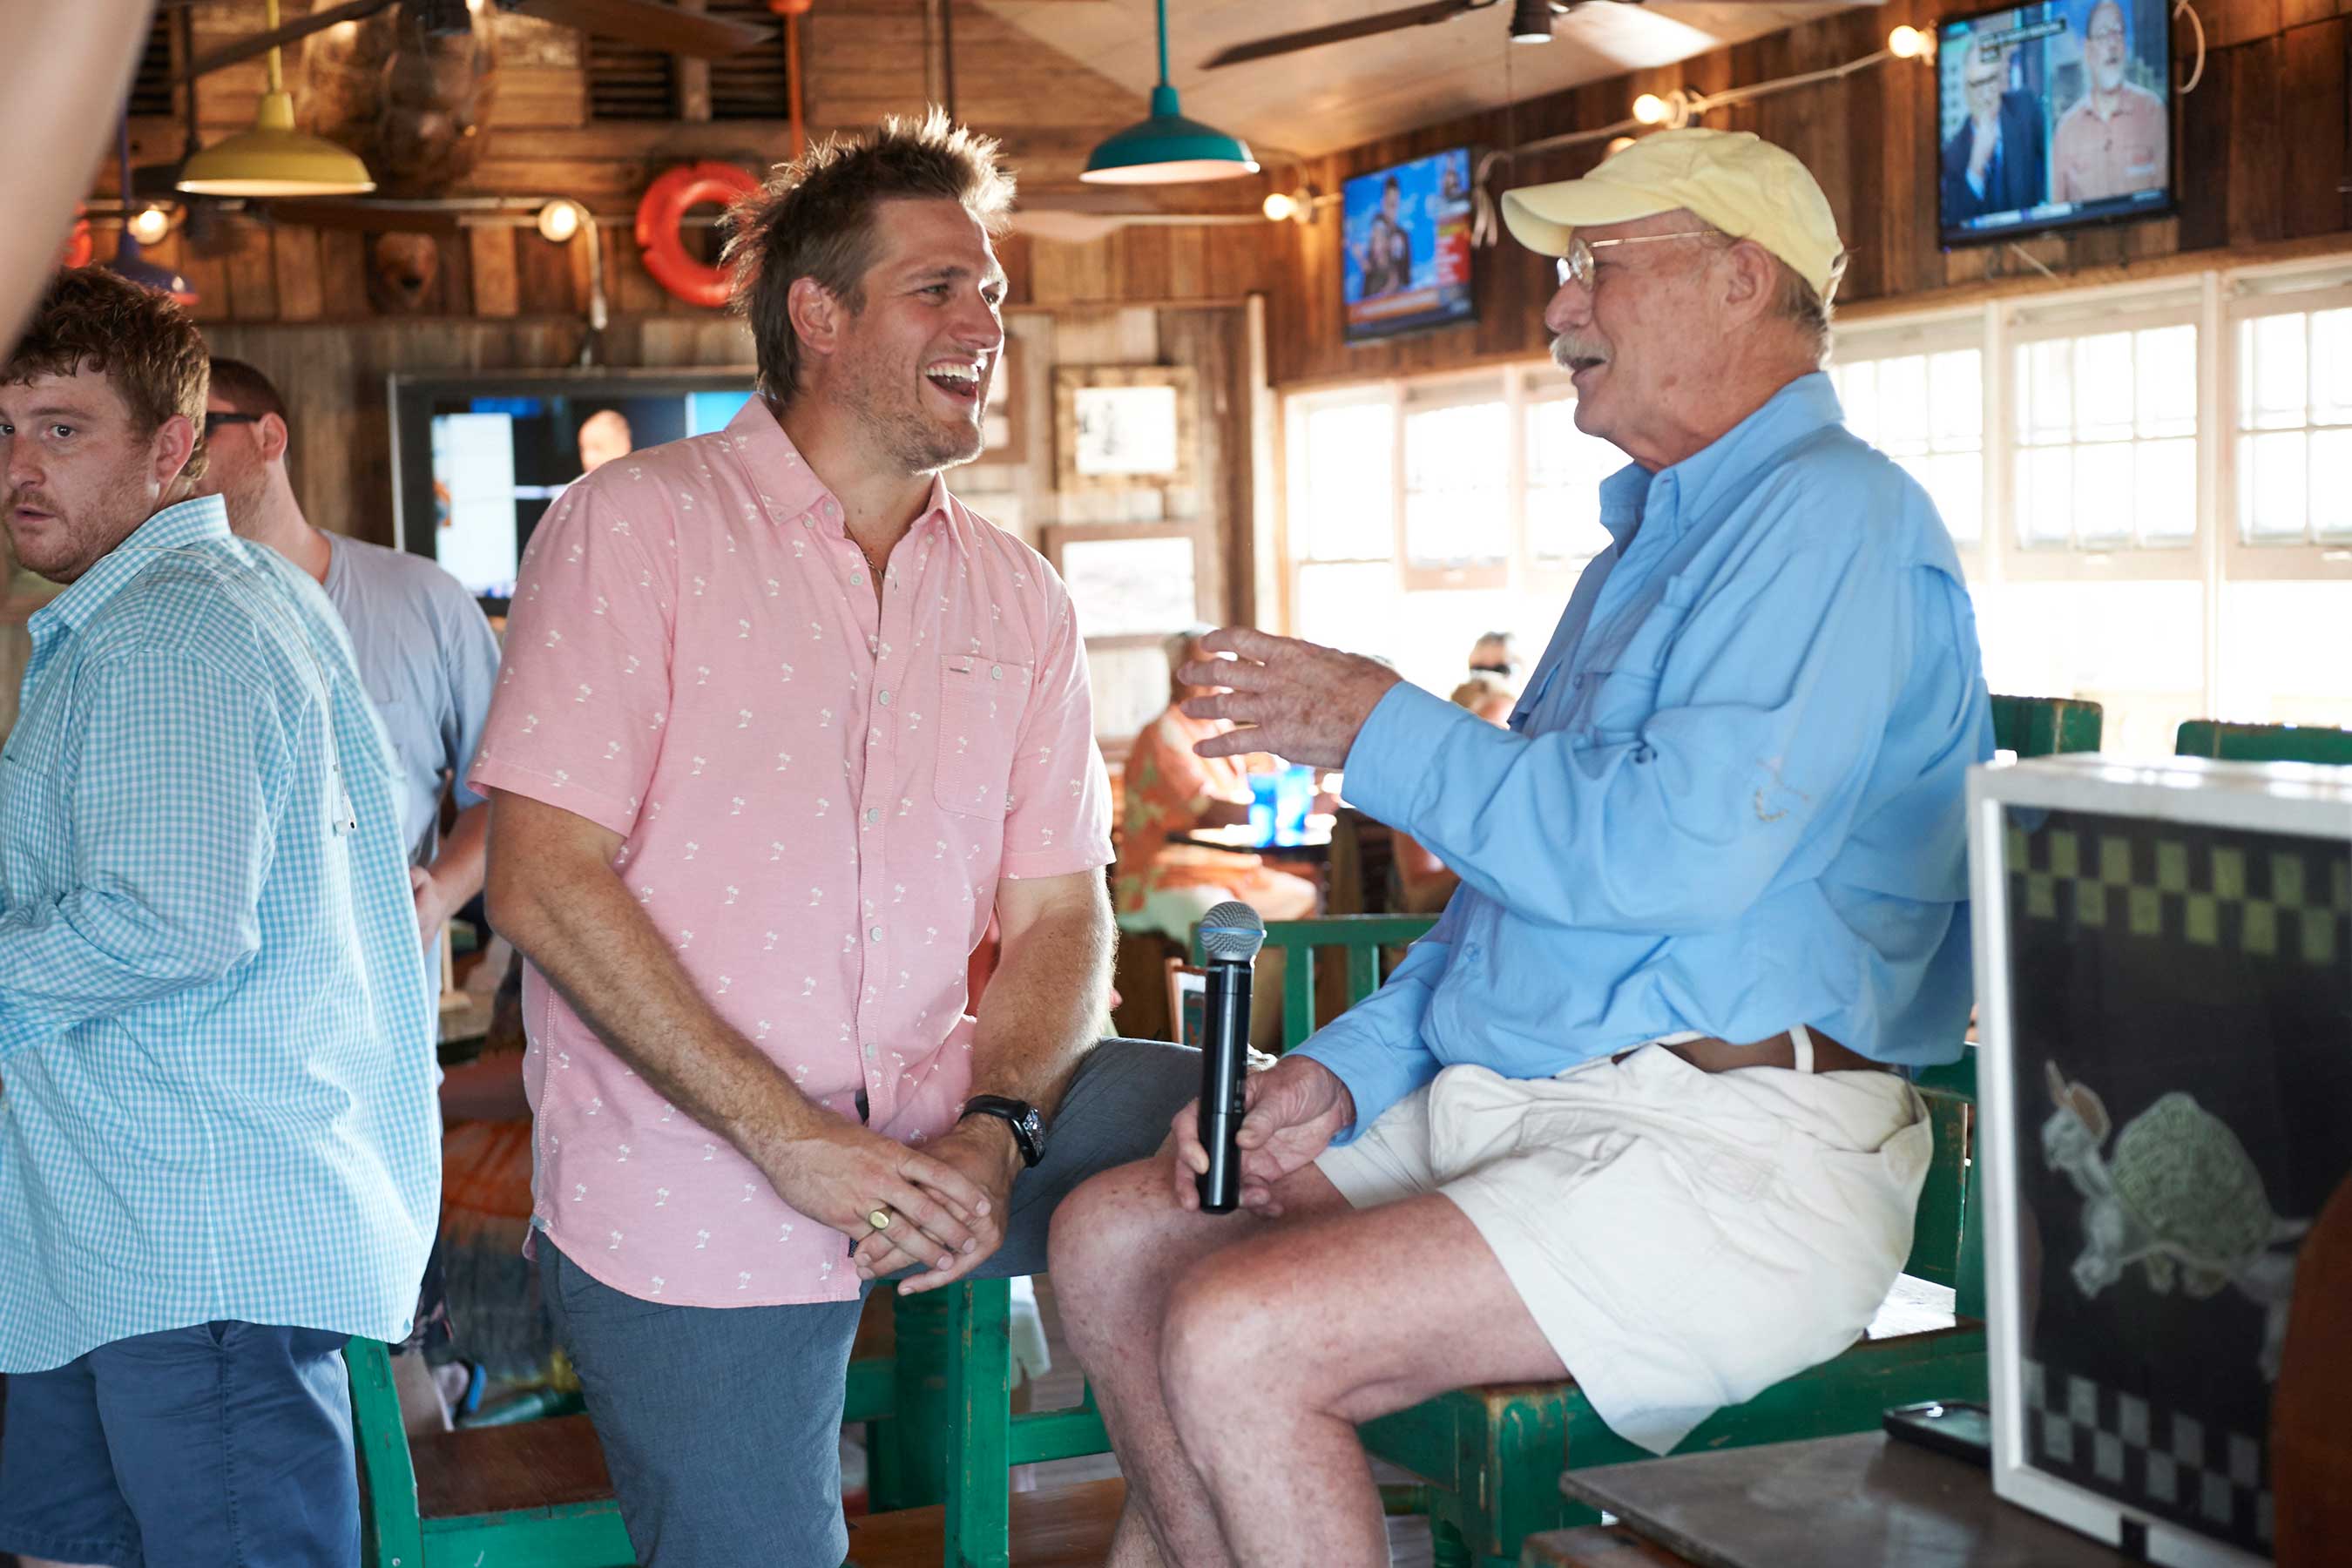 Host Curtis Stone chats with guests at Turtle Kraals on Food Network's Beach Eats